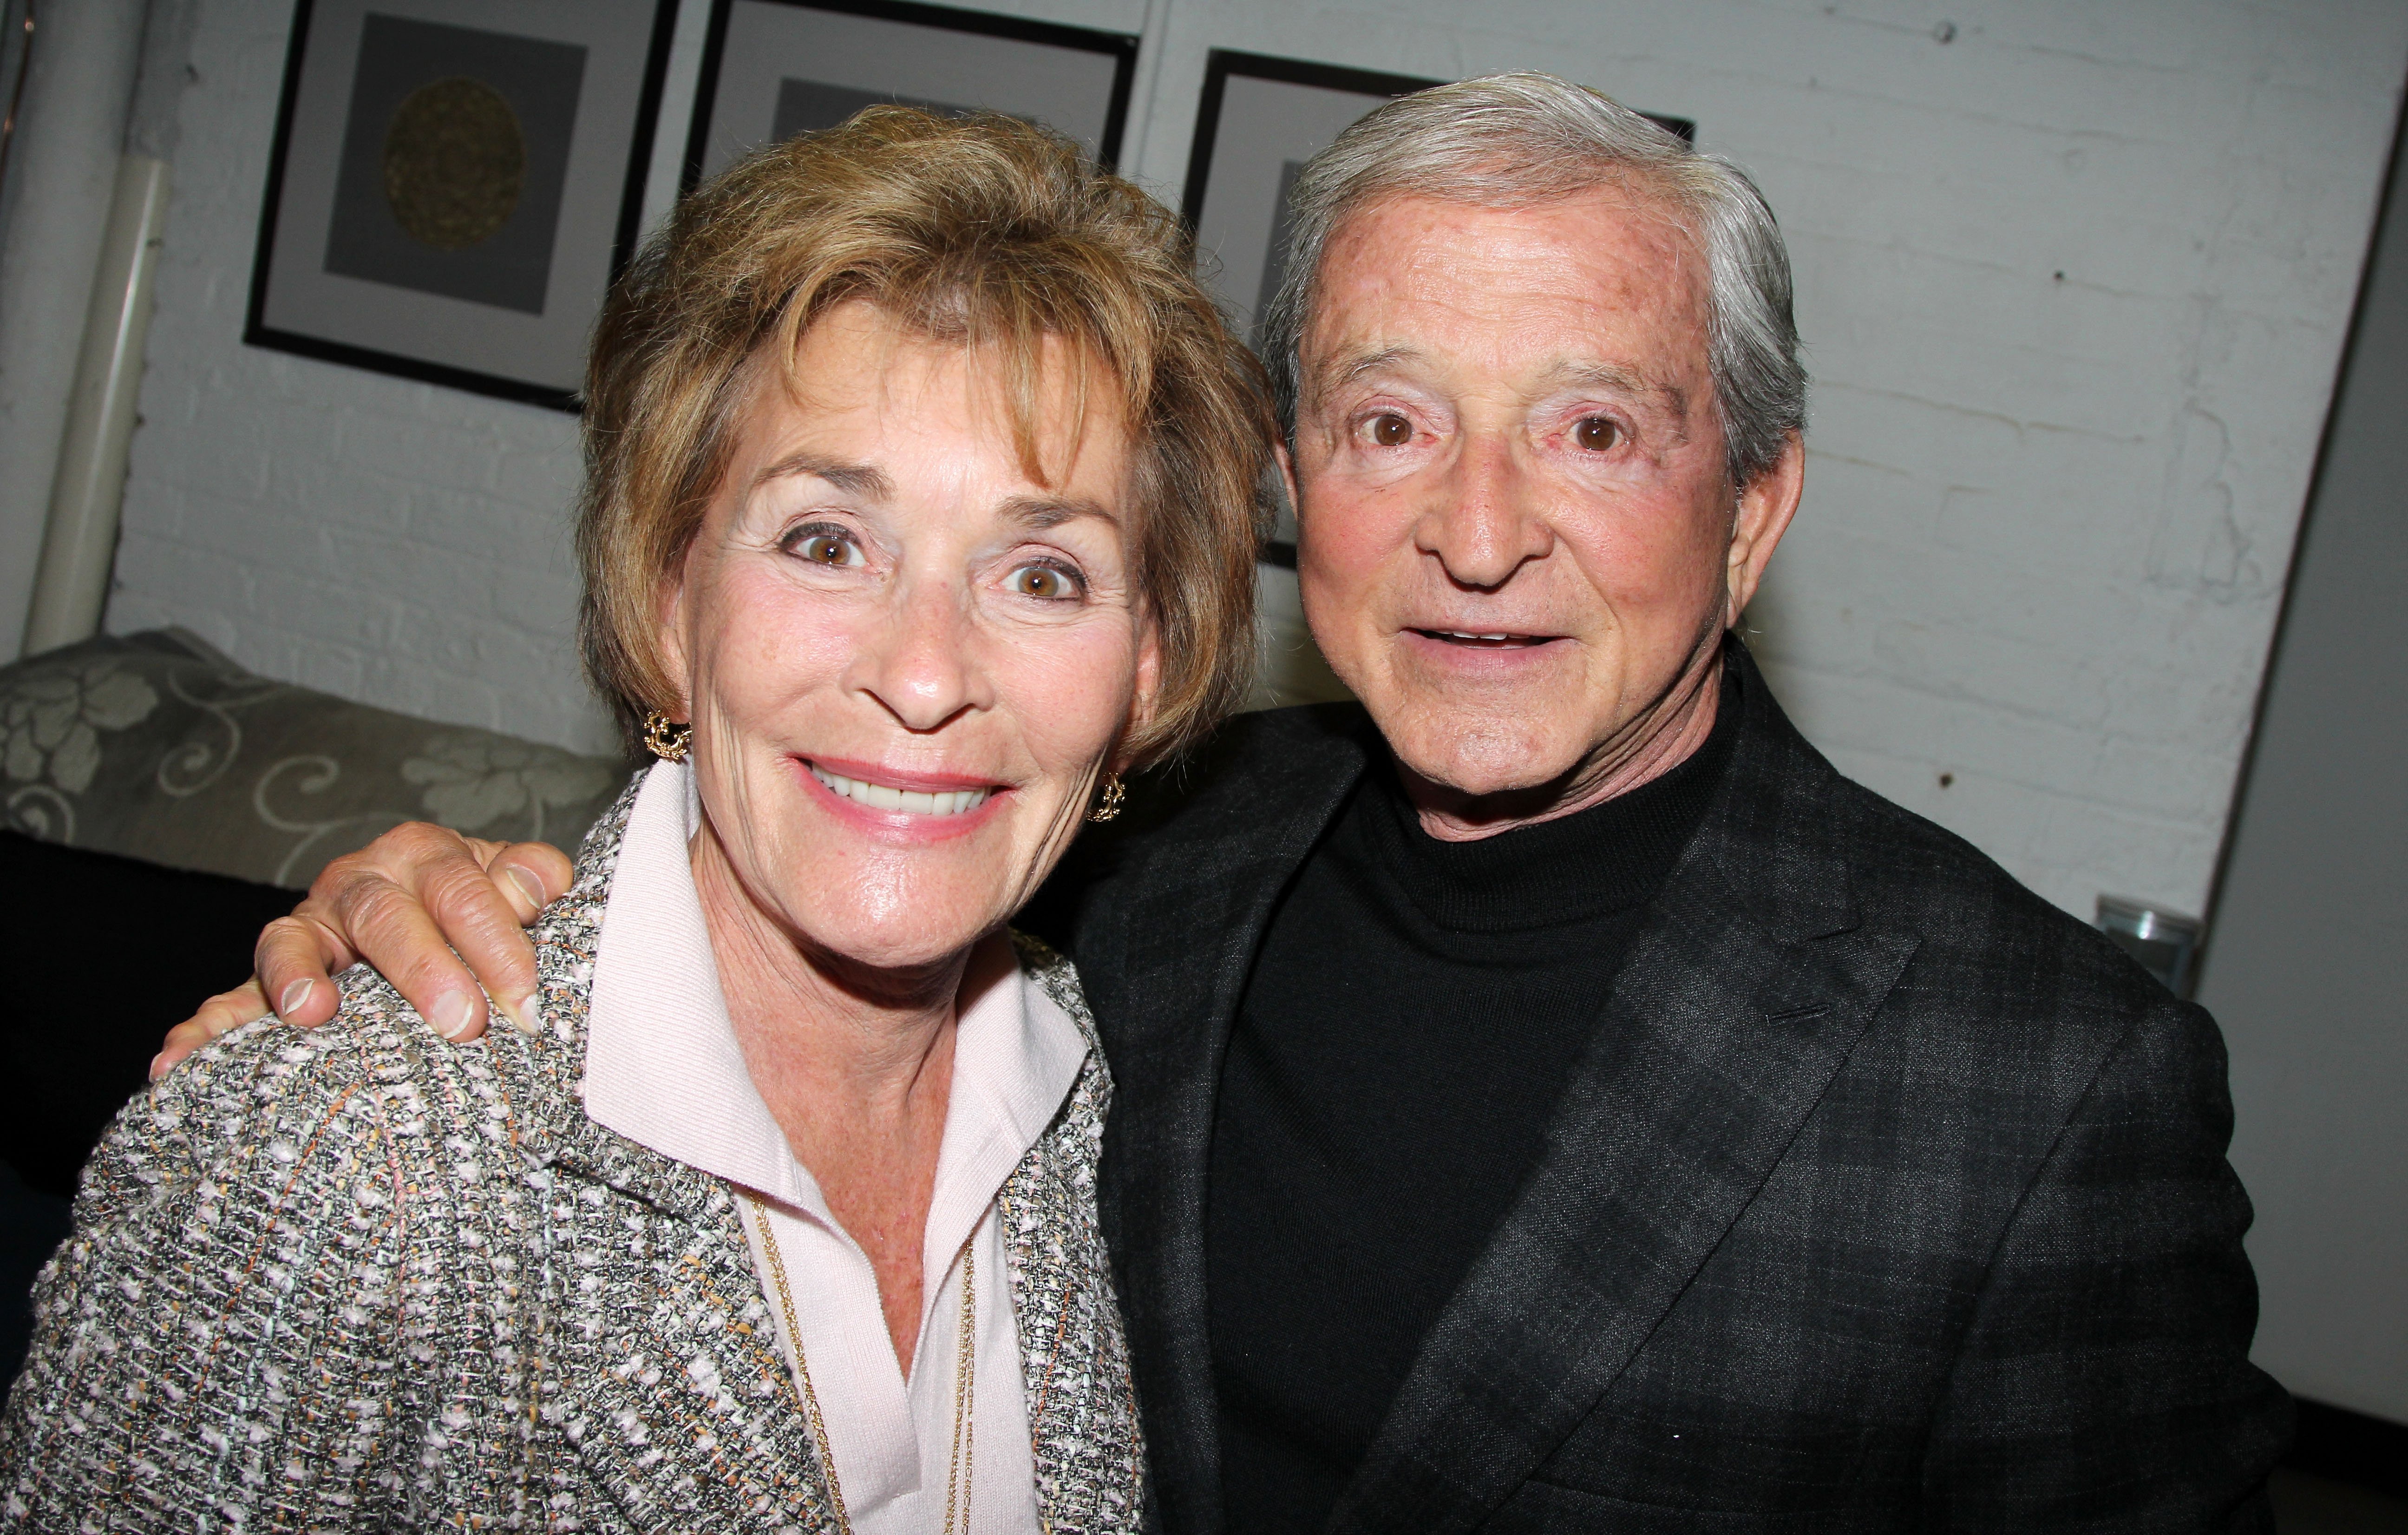 Judith "Judge Judy" Sheindlin and husband Judge Jerry Sheindlin pose backstage at the hit comedy "The Performers" on Broadway at The Longacre Theater on November 10, 2012 in New York City. | Source: Getty Images